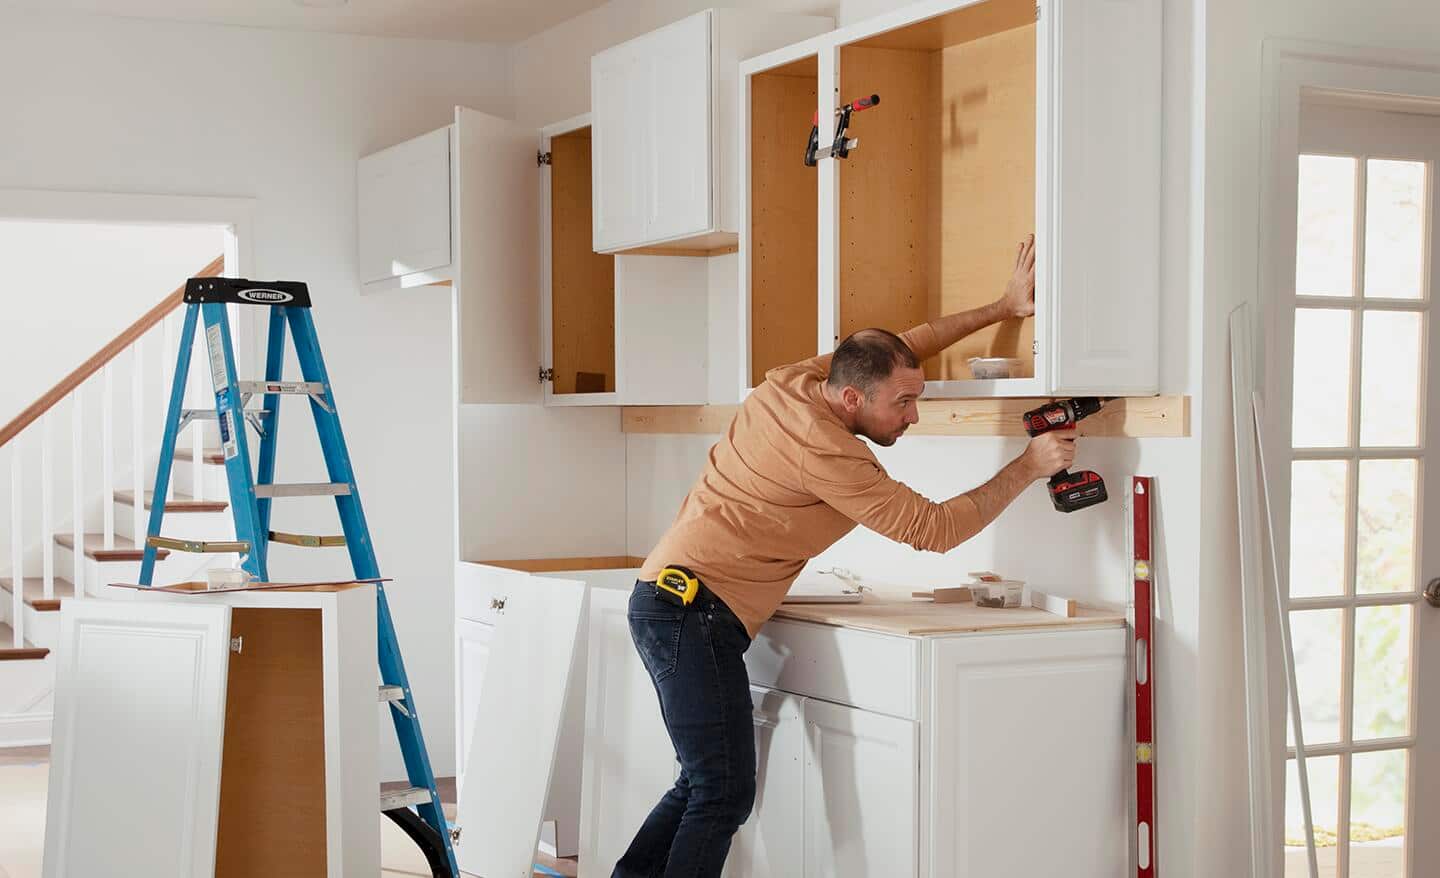 A person drills screws while attaching doors to cabinets.